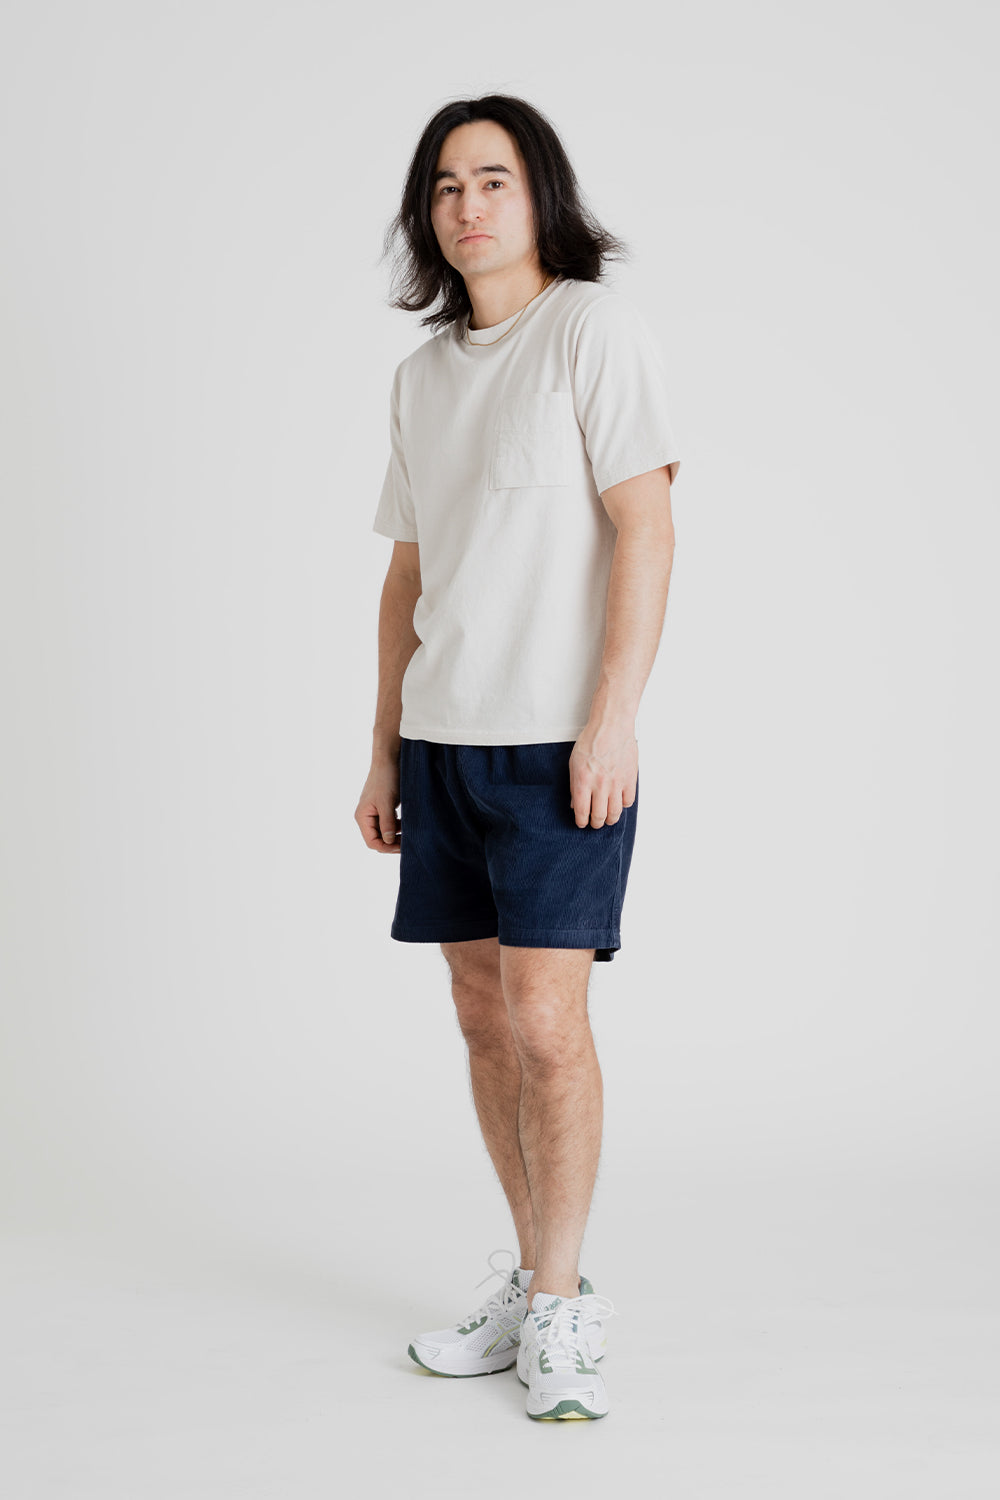 Foret Dose Corduroy Shorts in Navy